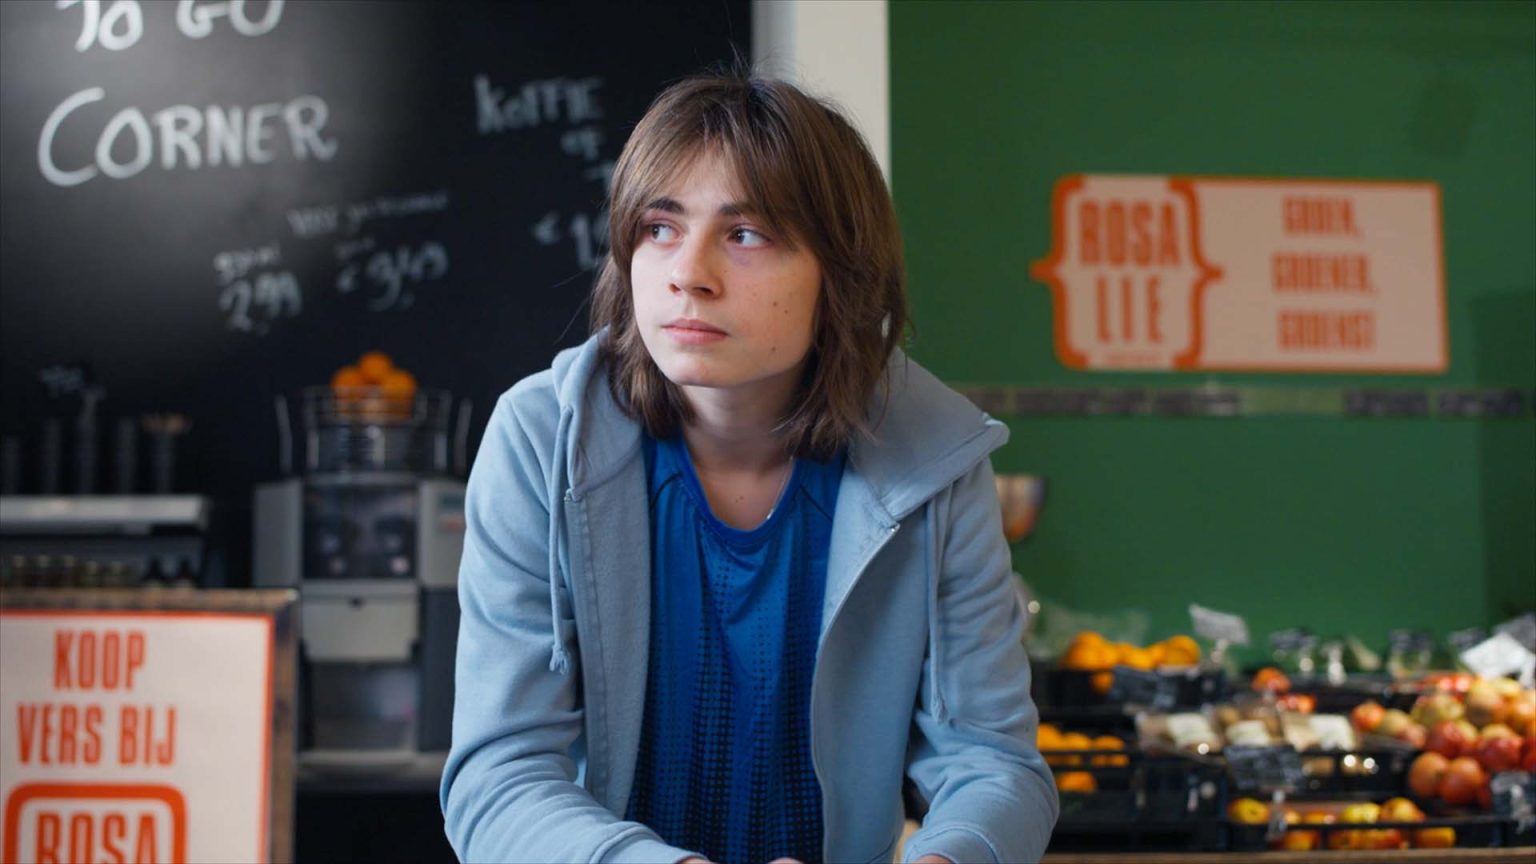 Still from 'Terror Zusje', episode 12 of Broodje Aap. It's a medium shot of a teenaged boy leaning on something off-screen in the middle of a grocery store. He has shoulder length light brown hair, a blue t-shirt and light blue hoodie and is looking bored, to the left.